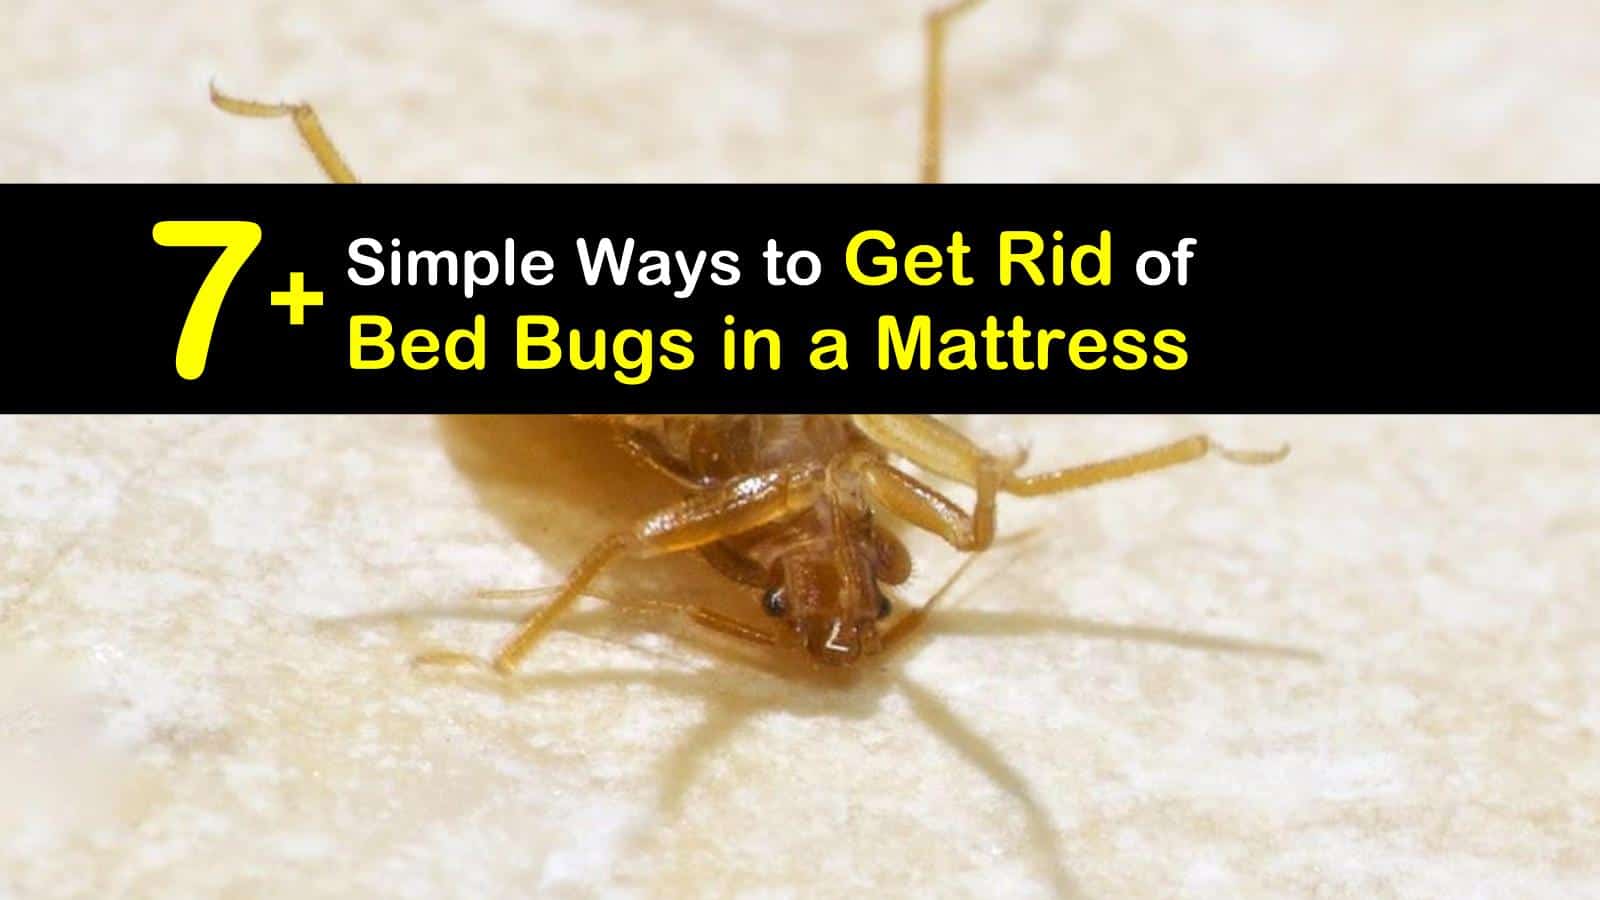 will a vinall mattress cover kill bed bugs